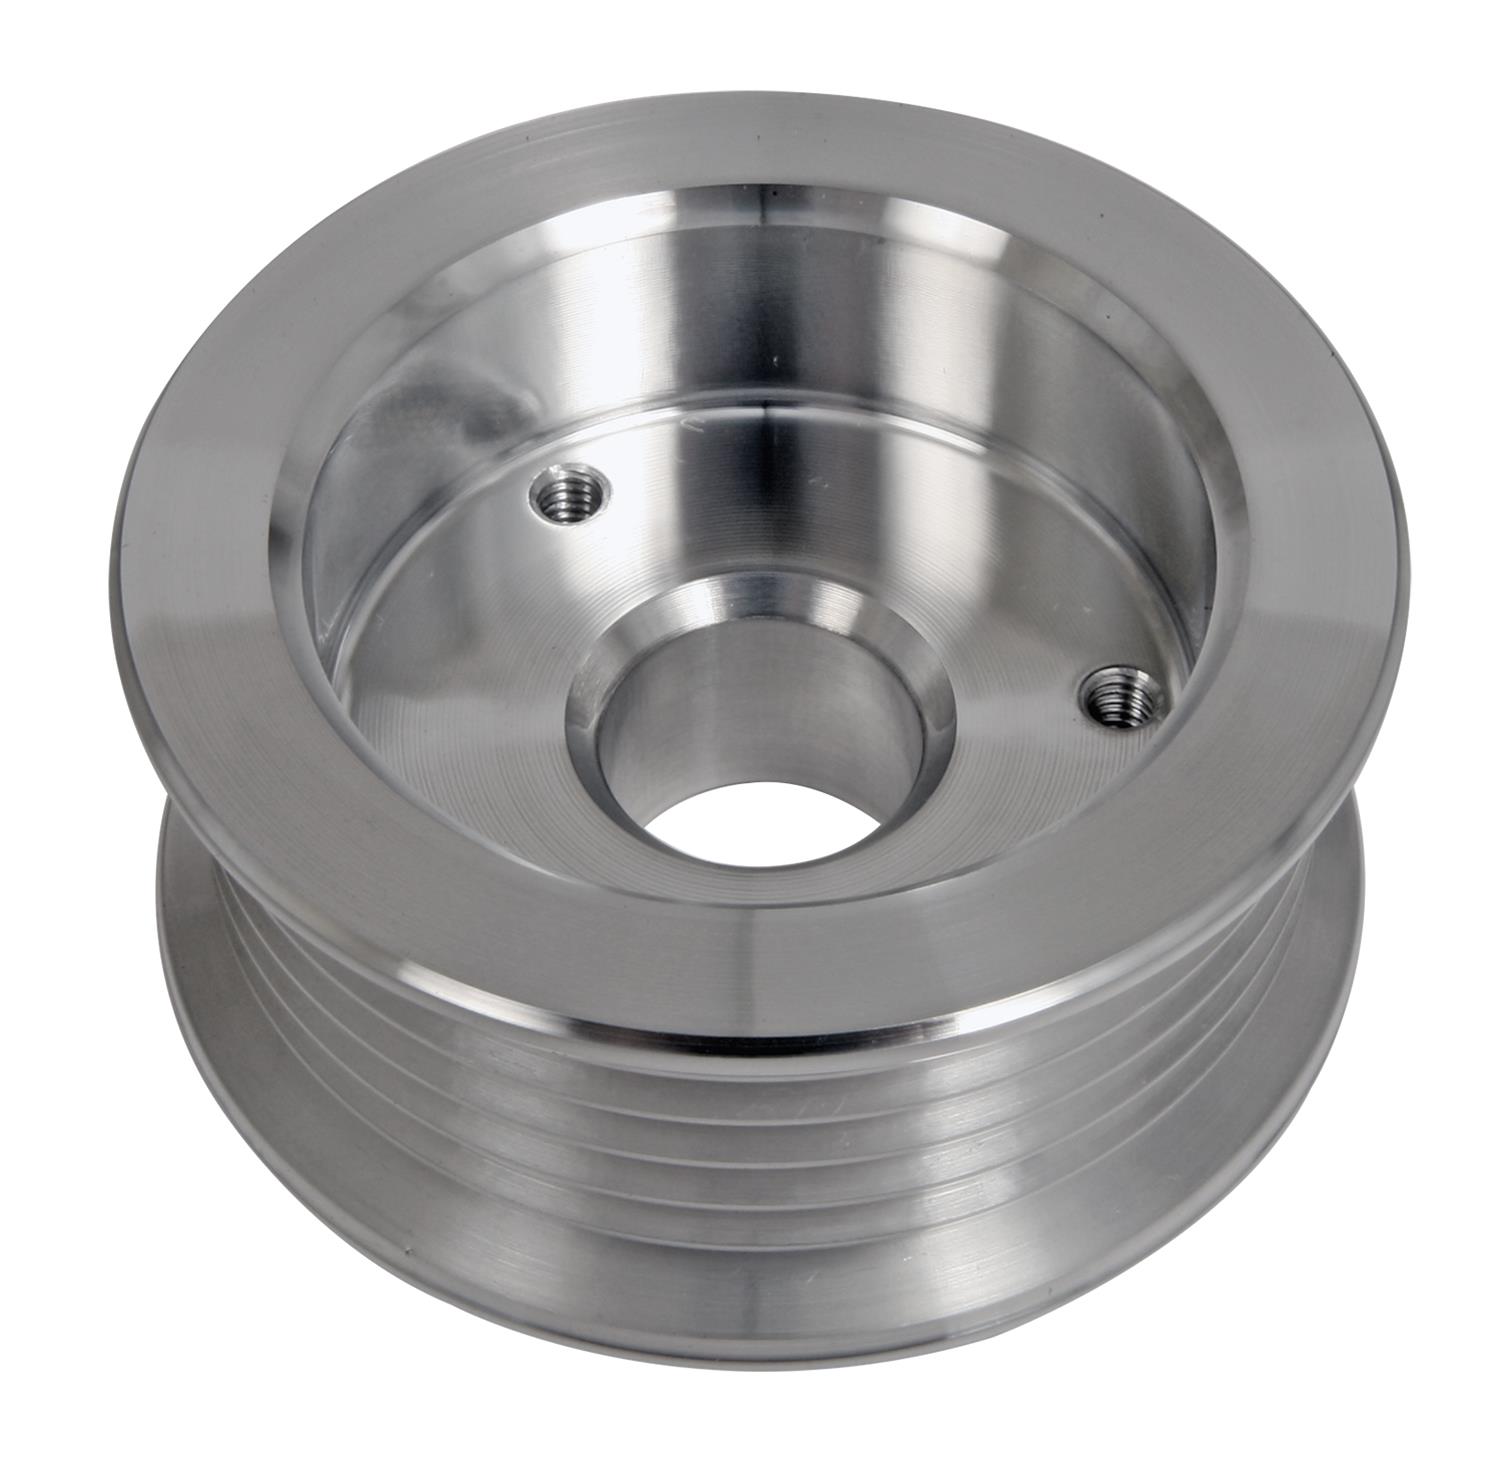 March Performance 206 Race Series Polished Billet Aluminum Serpentine Alternator Pulley with Cover 